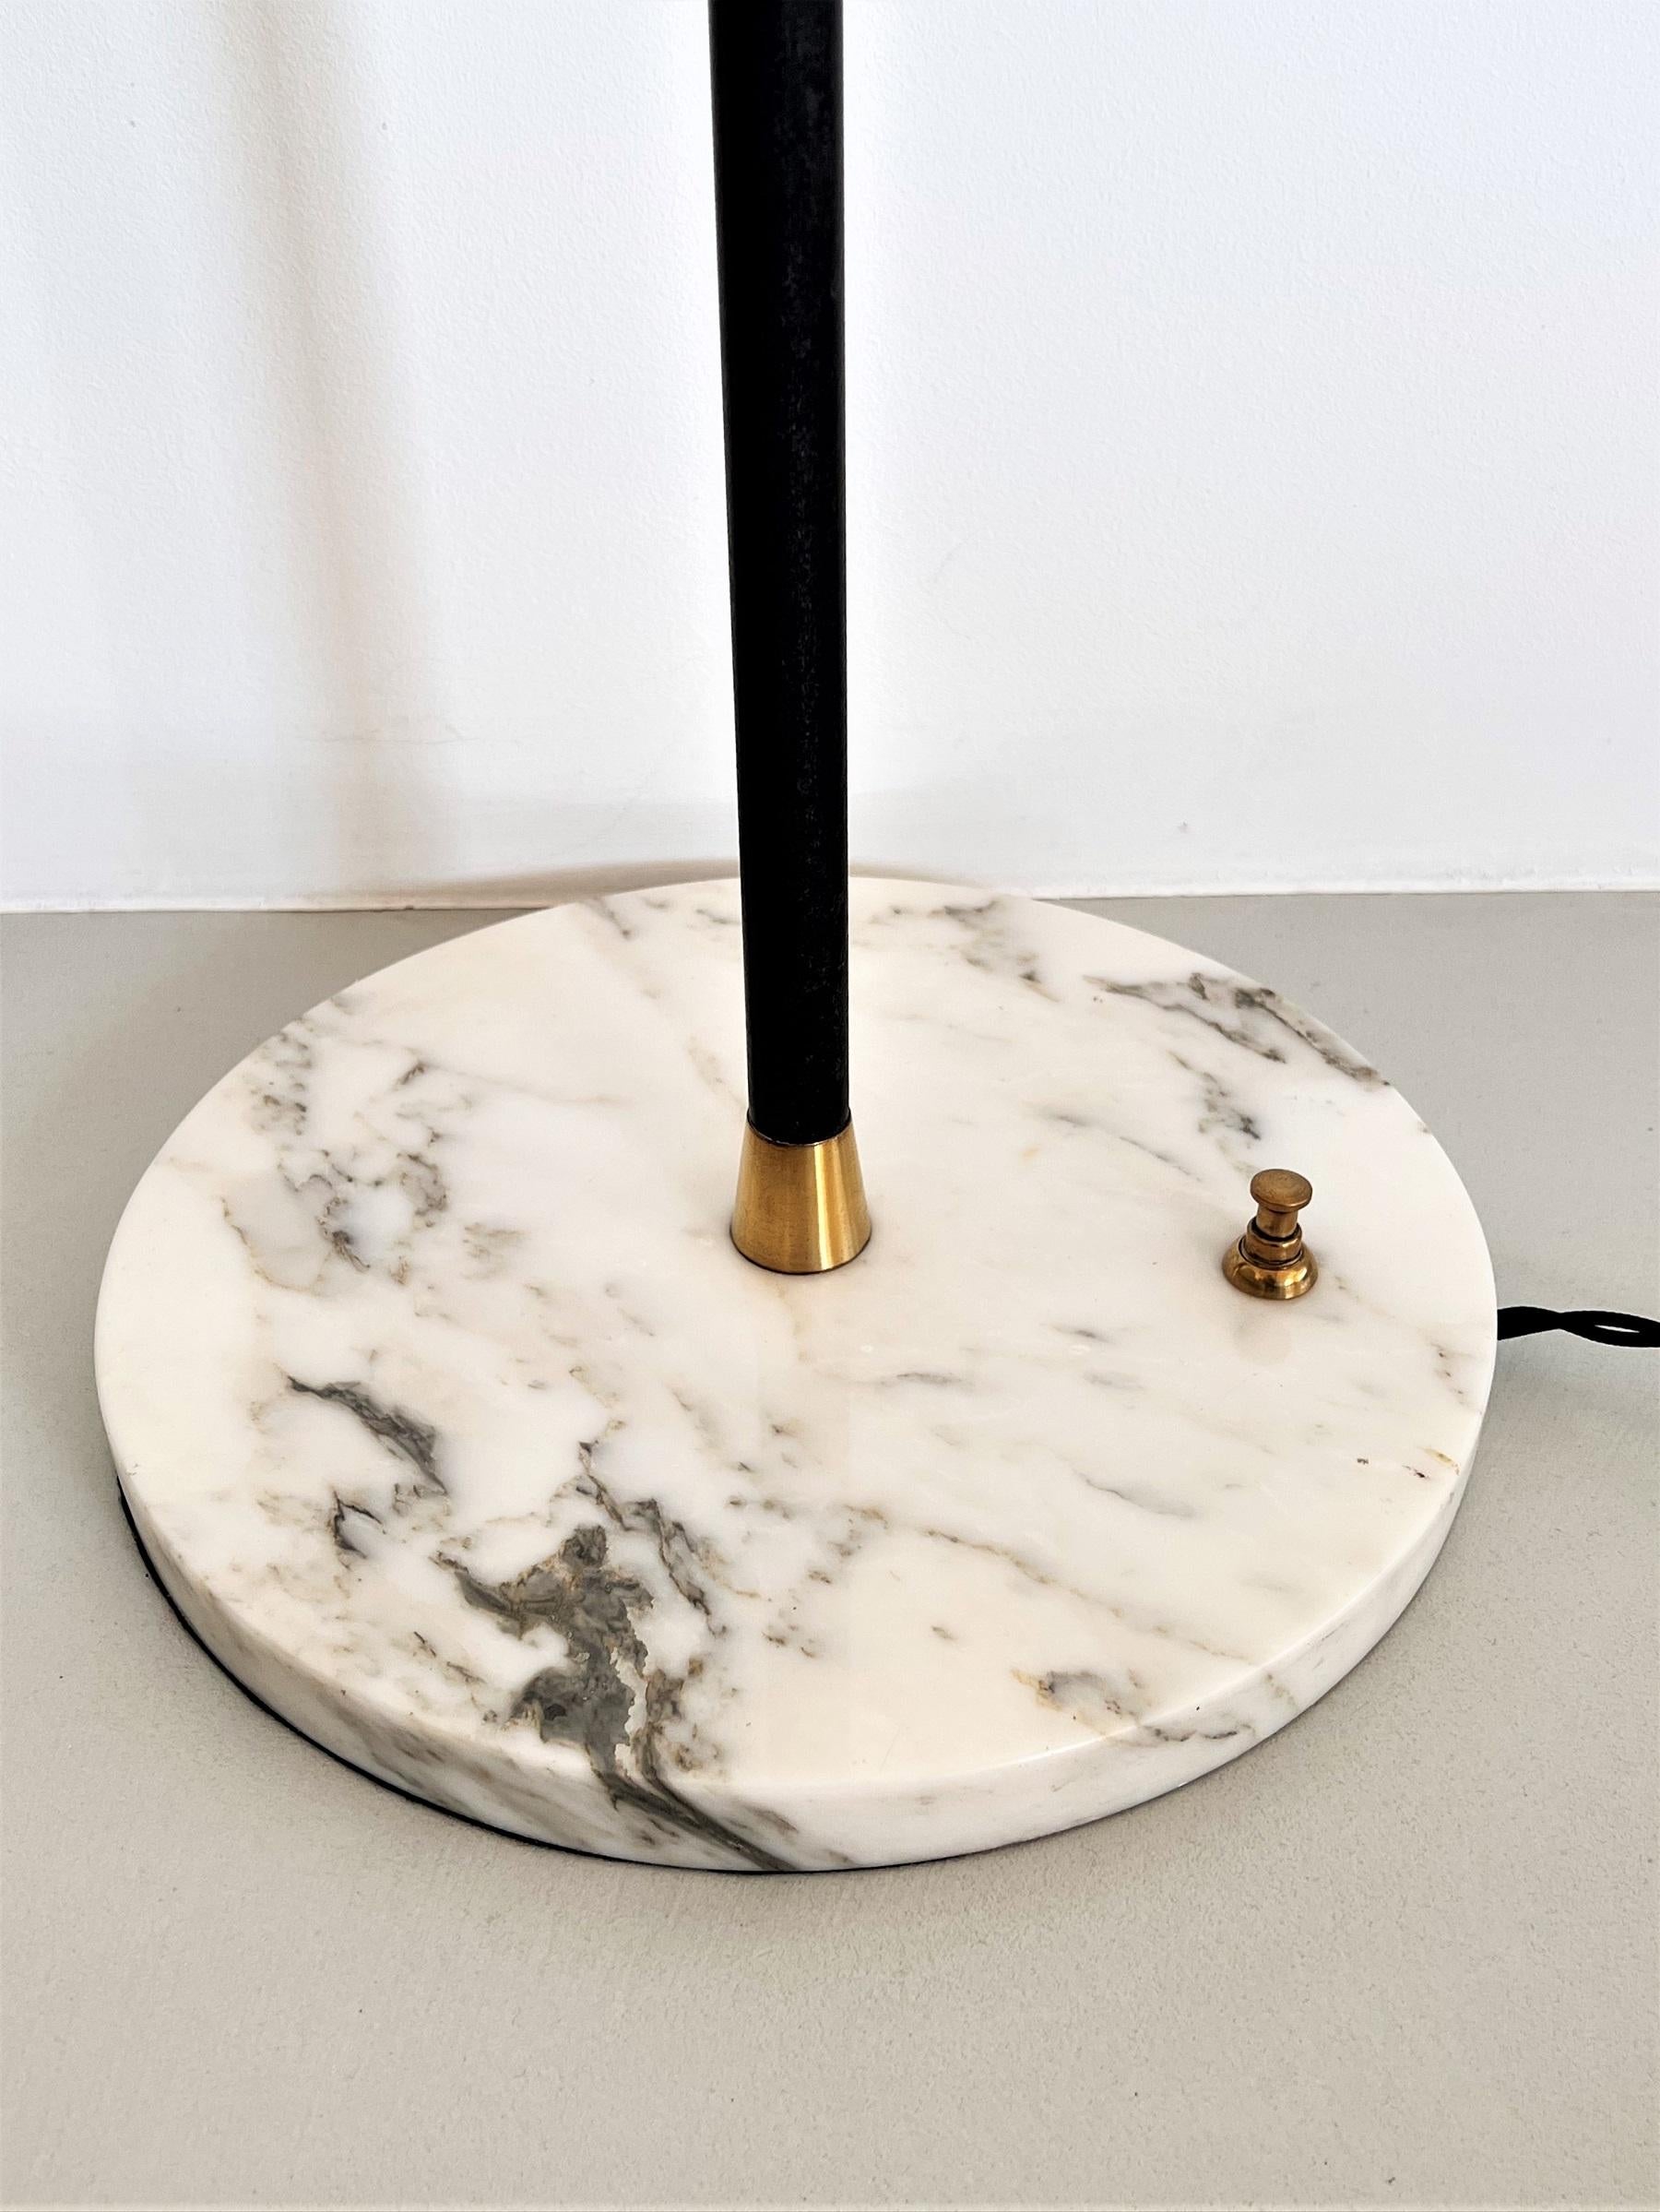 Italian Midcentury Floor Lamp in Glass, Brass and Marble by Reggiani, 1960s For Sale 2